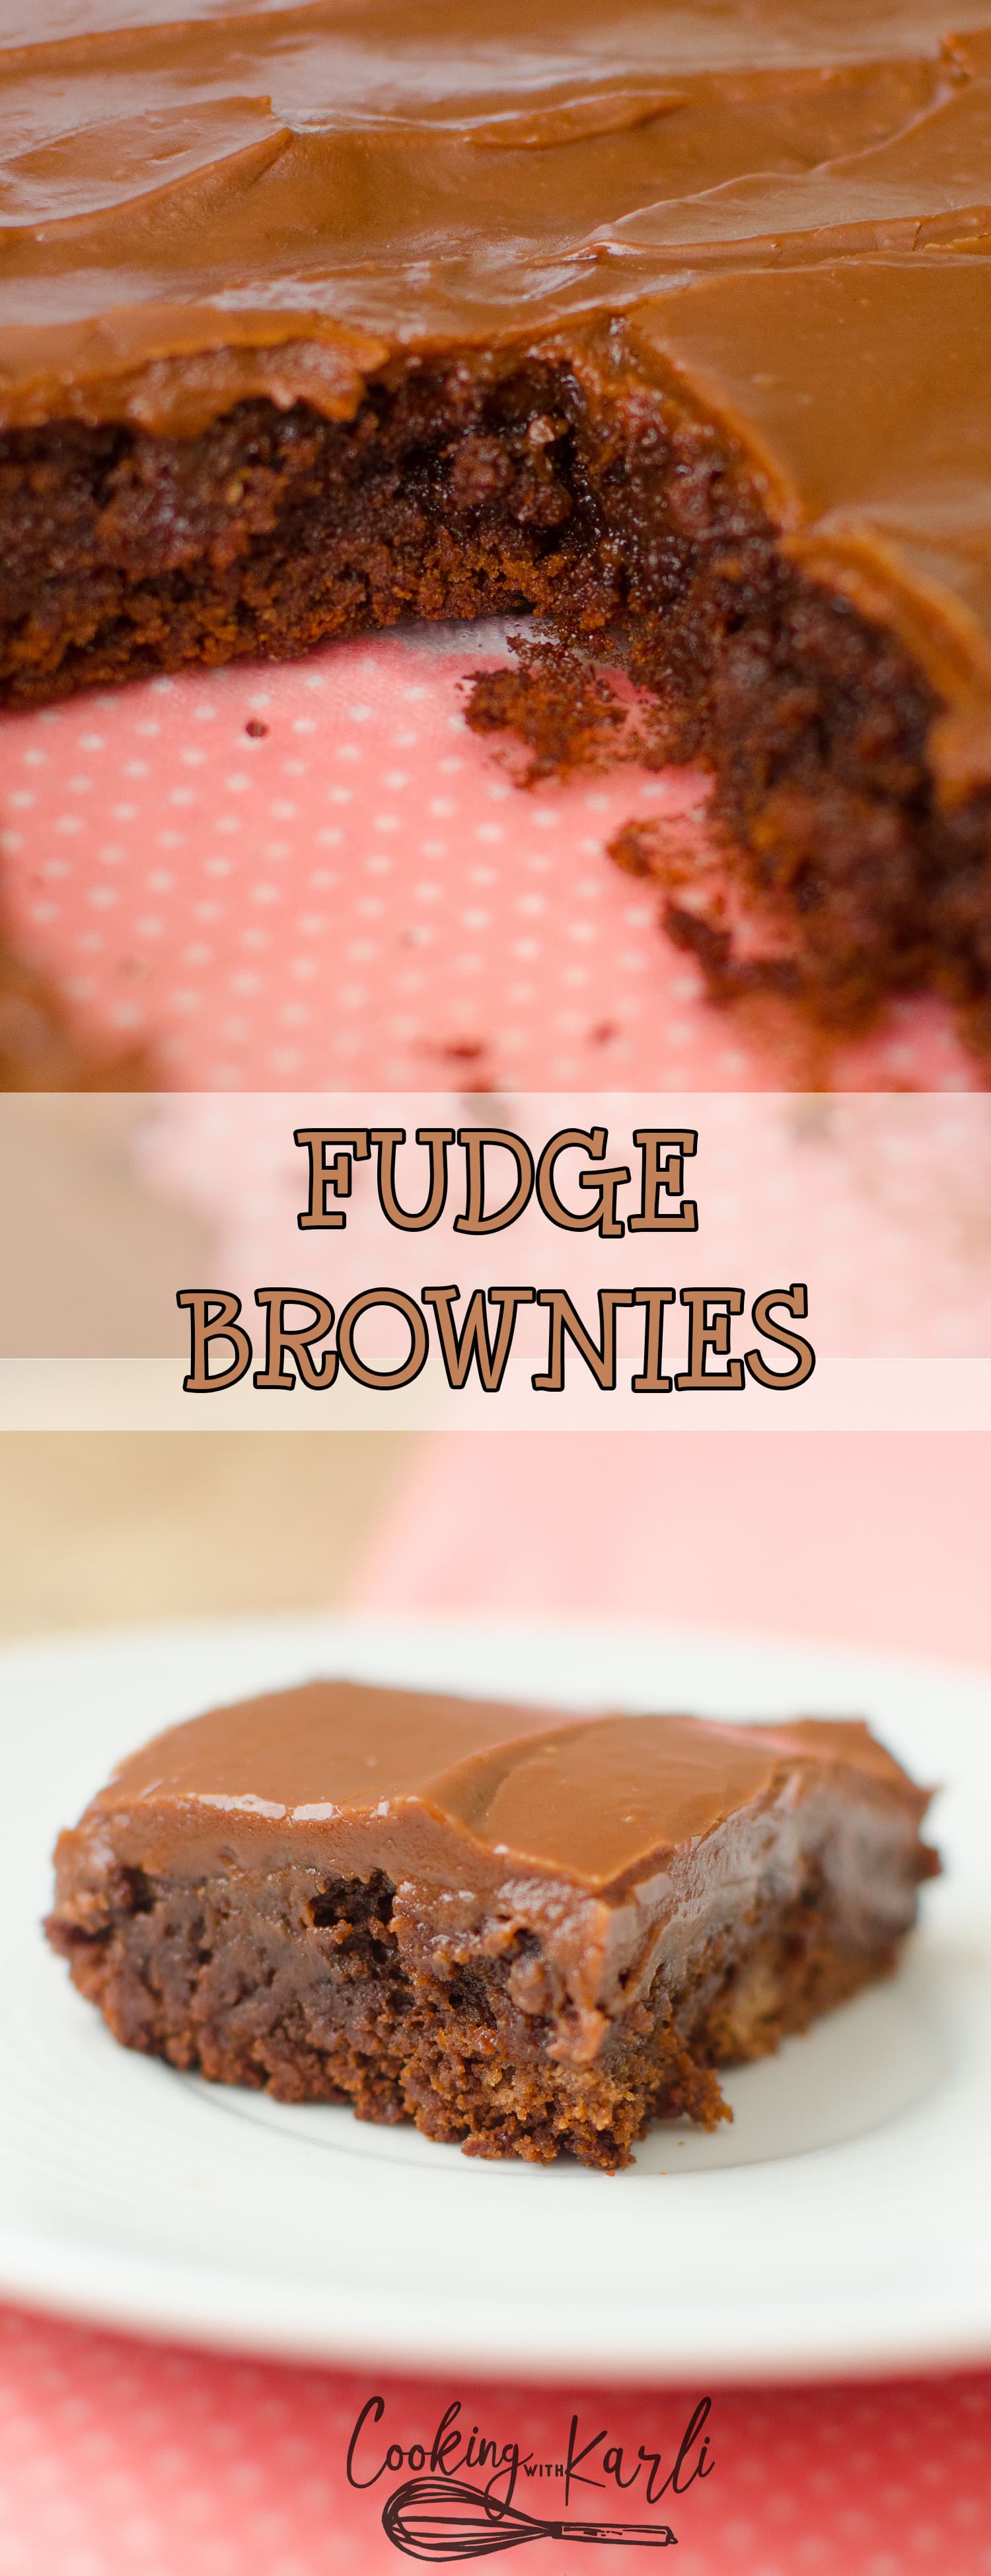 Fudge Brownies are thick, chewy and gooey! The fudge chocolate frosting is poured hot onto warm brownies; the two kind of blend together to make one extremely rich, Fudge Brownie. |Cooking with Karli| #brownie #recipe #fudge #nomixer #chewy #dessert